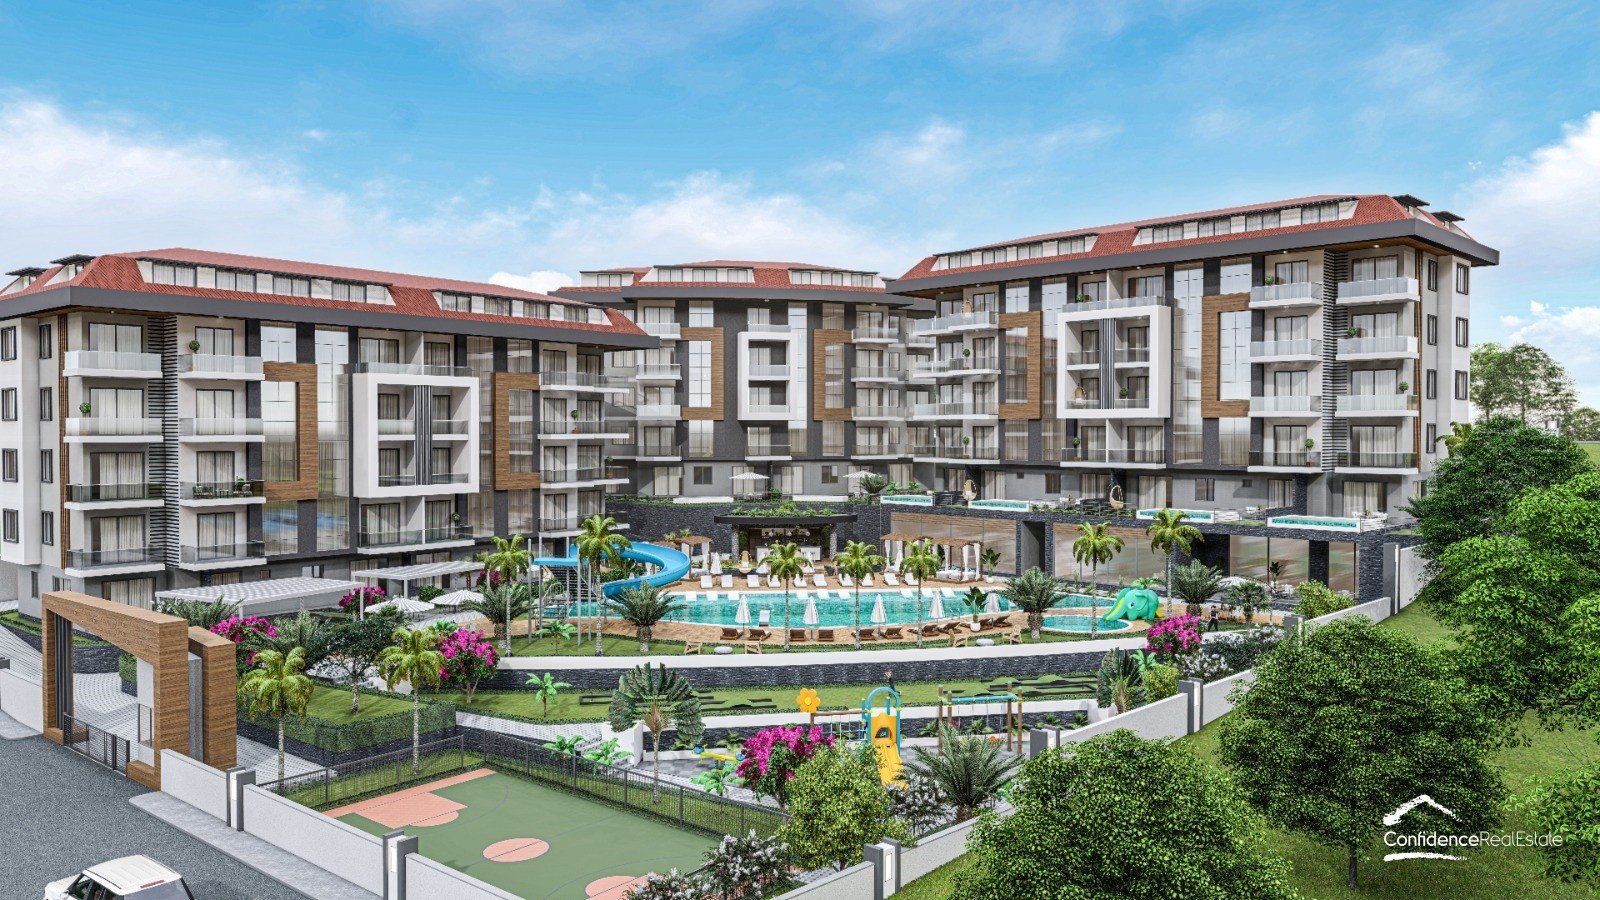 New complex, an island of coziness and comfort 700 meters from the sea